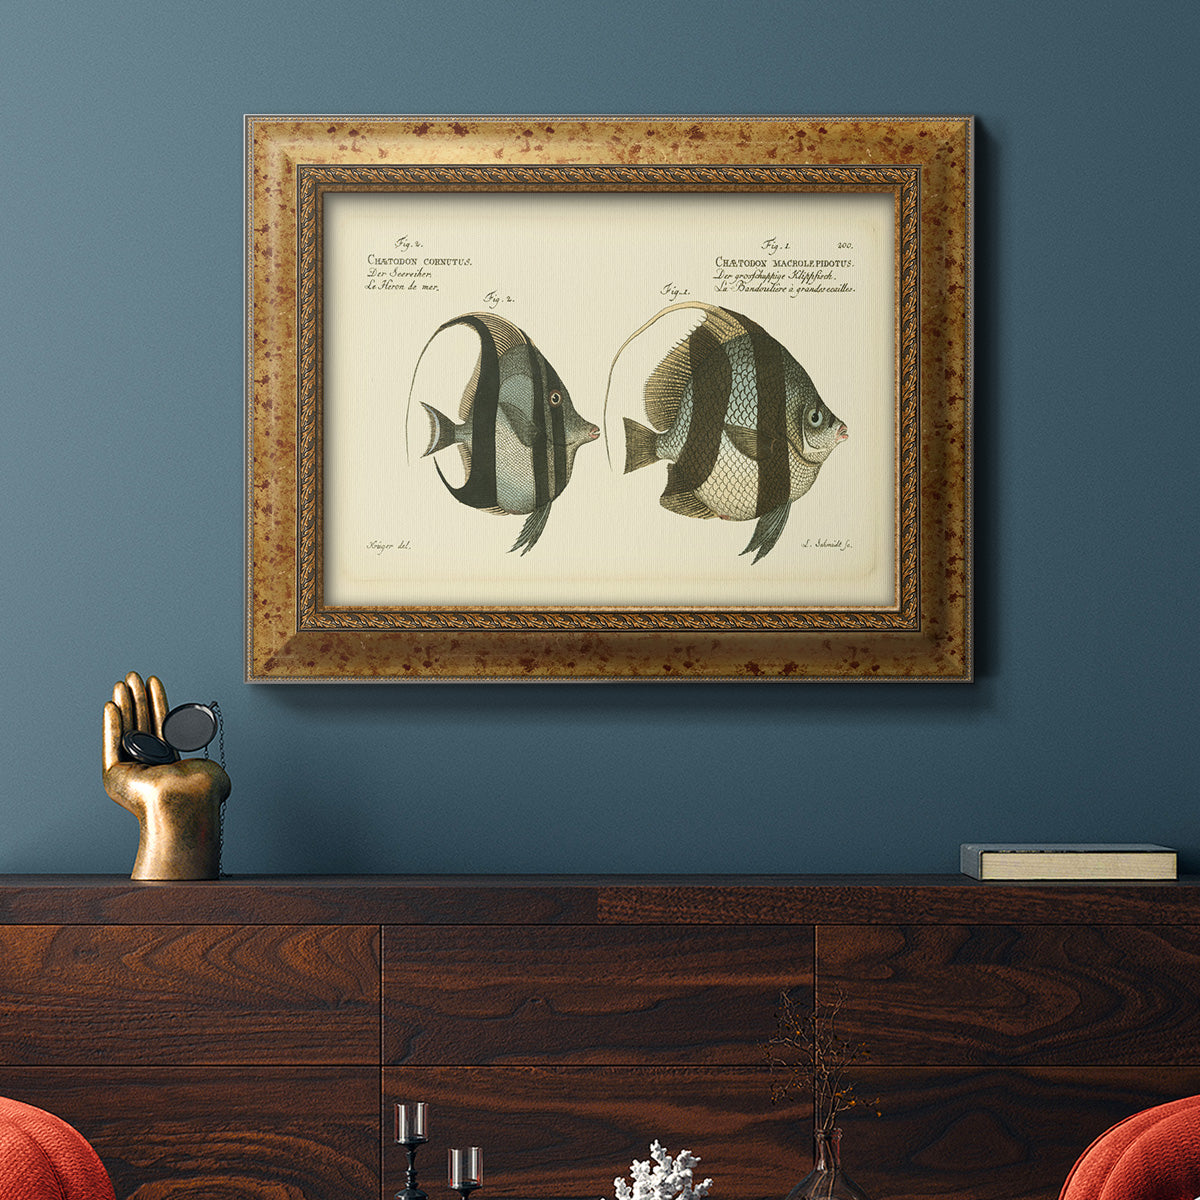 Bloch Antique Fish I Premium Framed Canvas- Ready to Hang